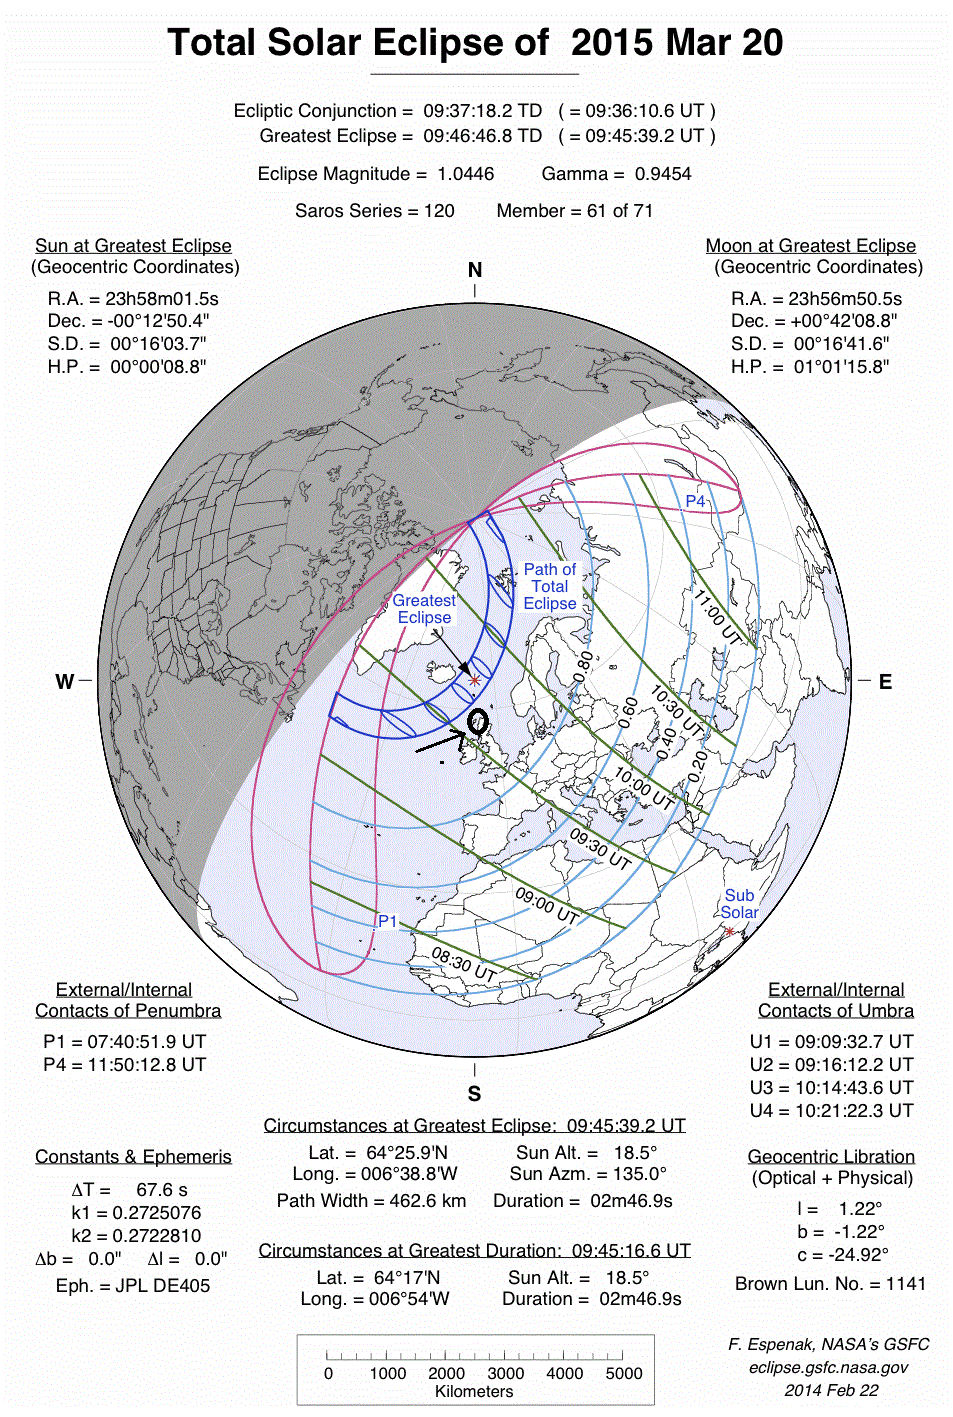 Solar eclipse 20.03.2015 map and my observation site